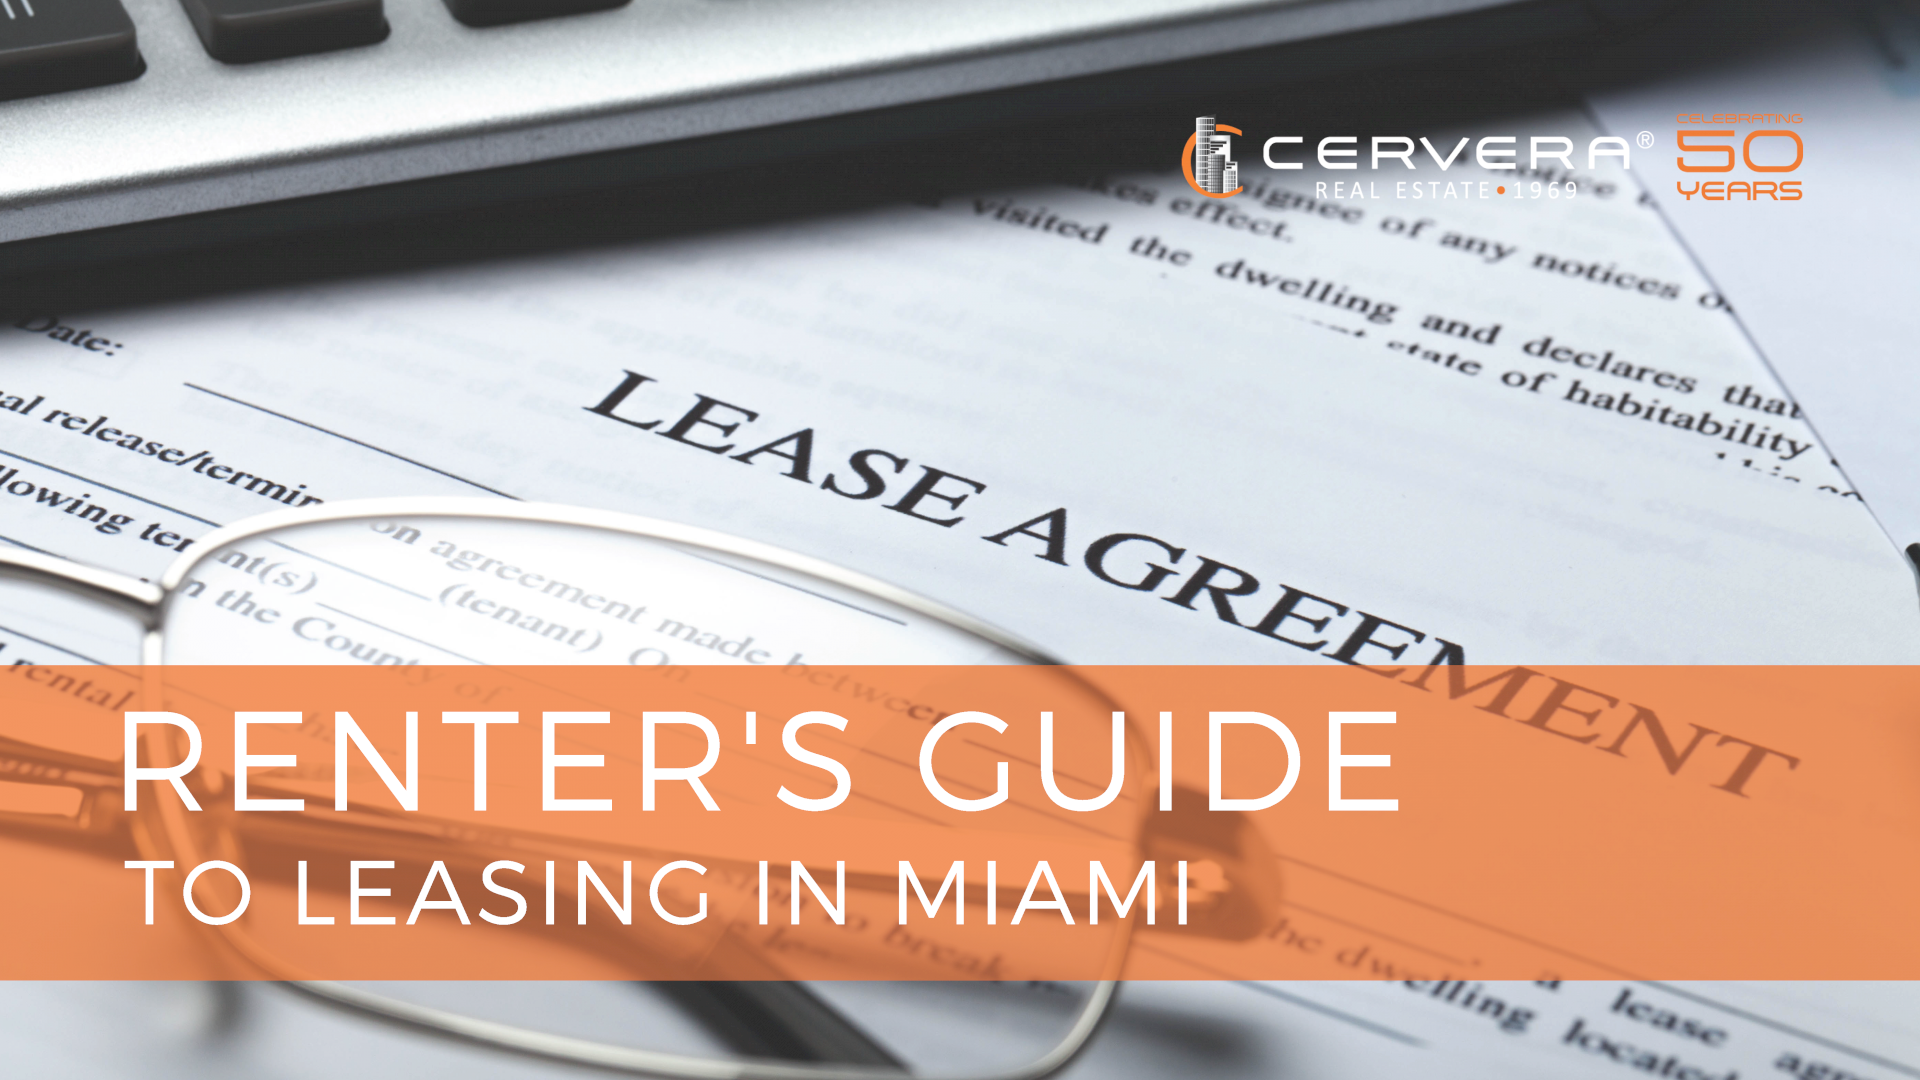 Renter's Guide to Leasing in Miami